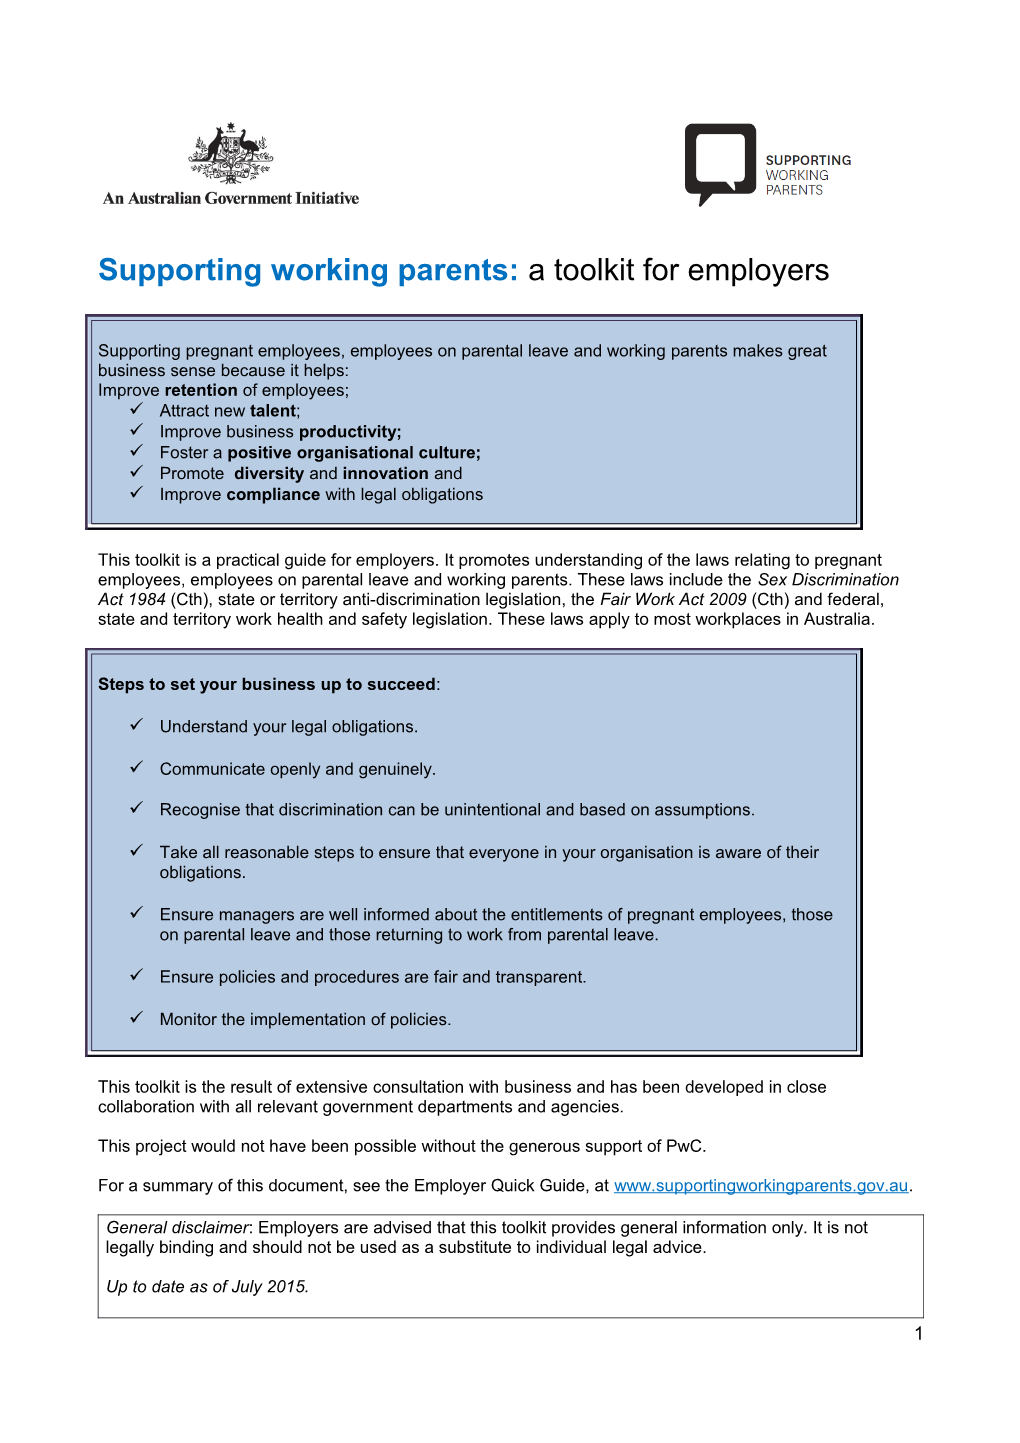 Supporting Working Parents: a Toolkit for Employers